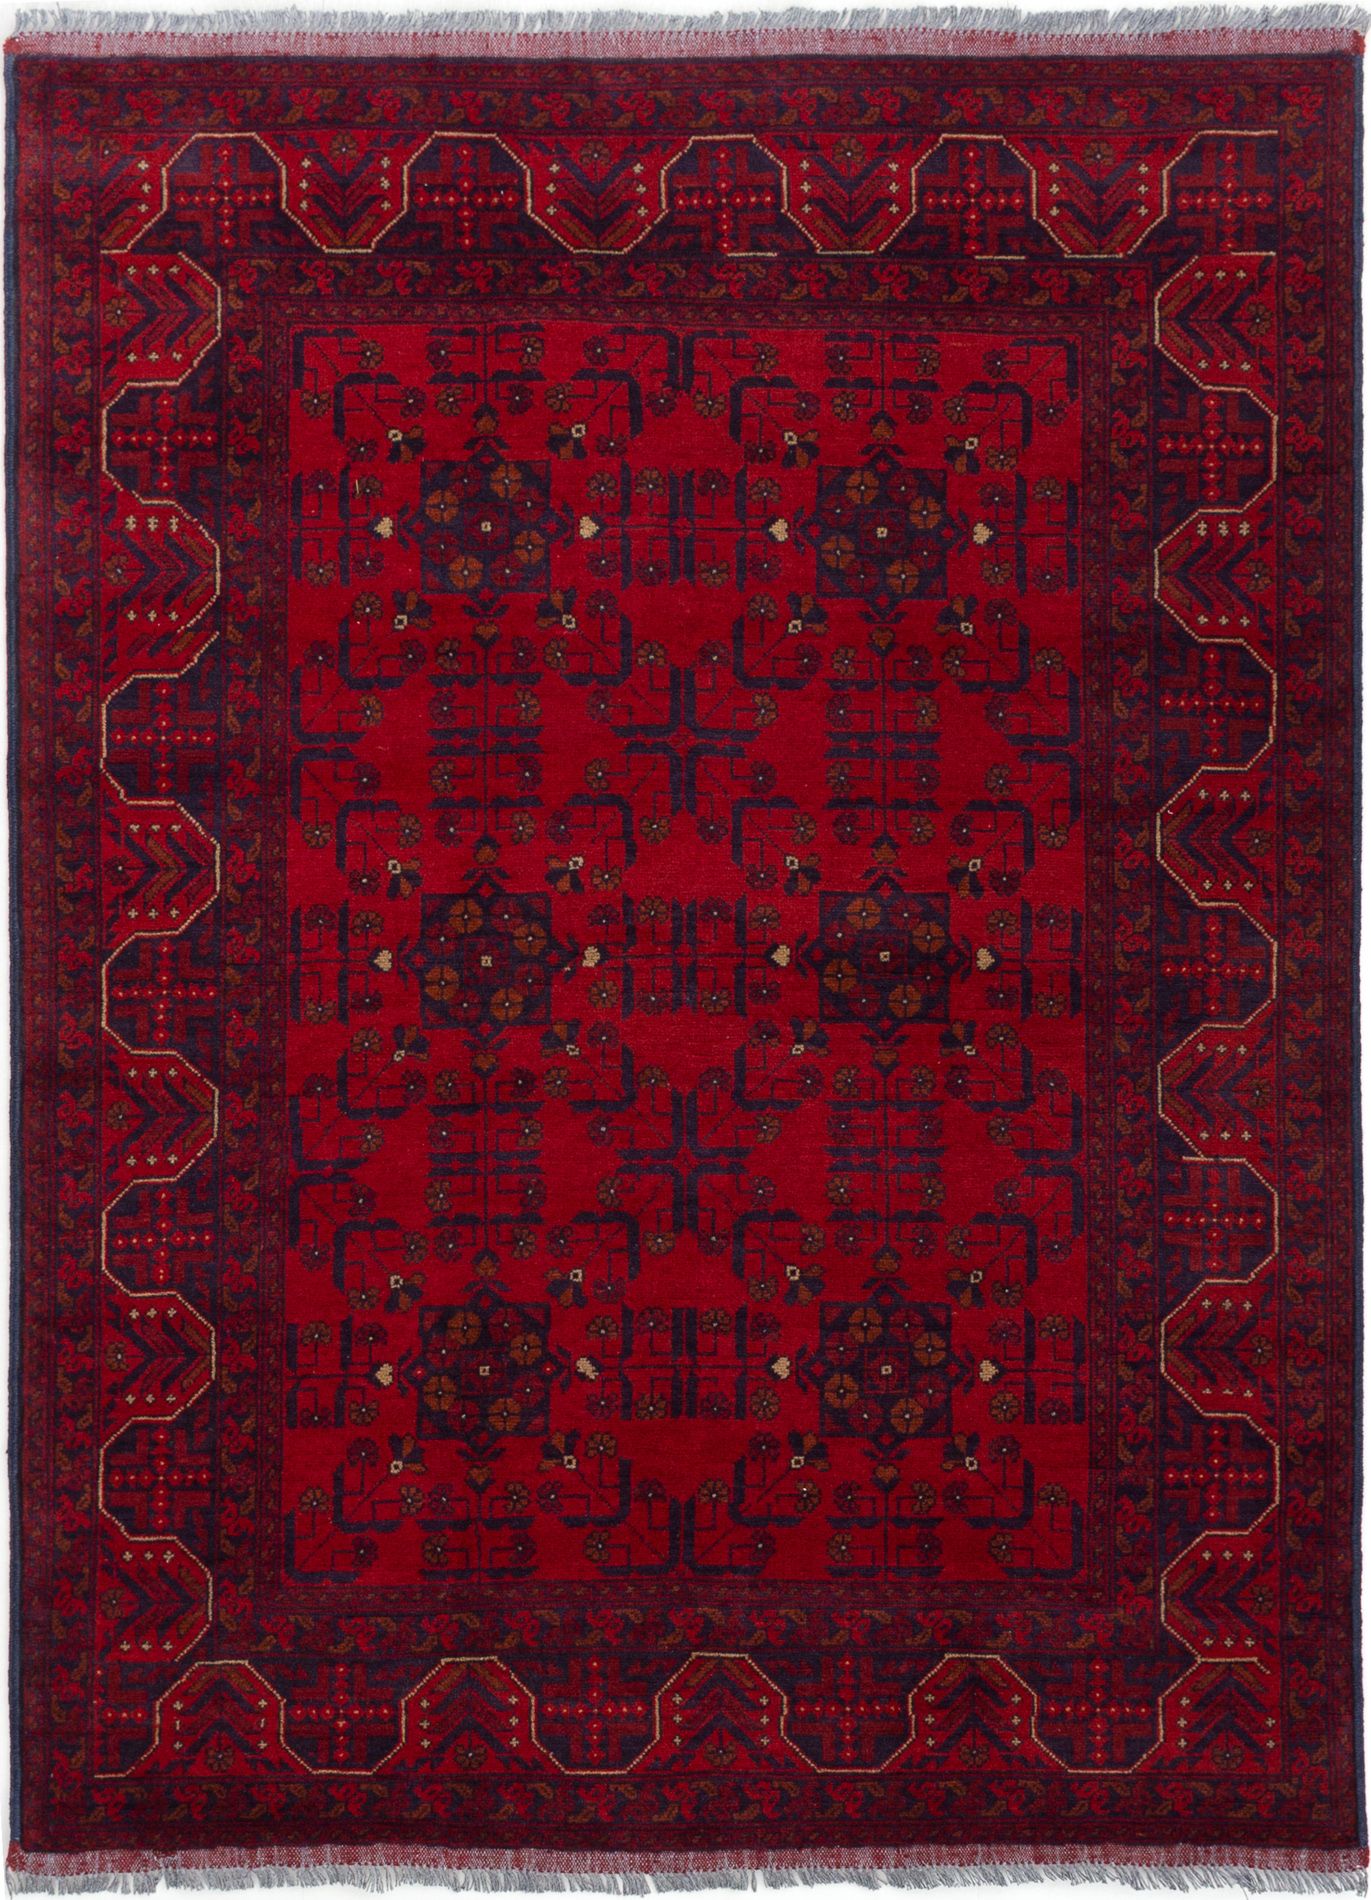 Hand-knotted Finest Khal Mohammadi Red Wool Rug 5'1" x 6'5"  Size: 5'1" x 6'5"  